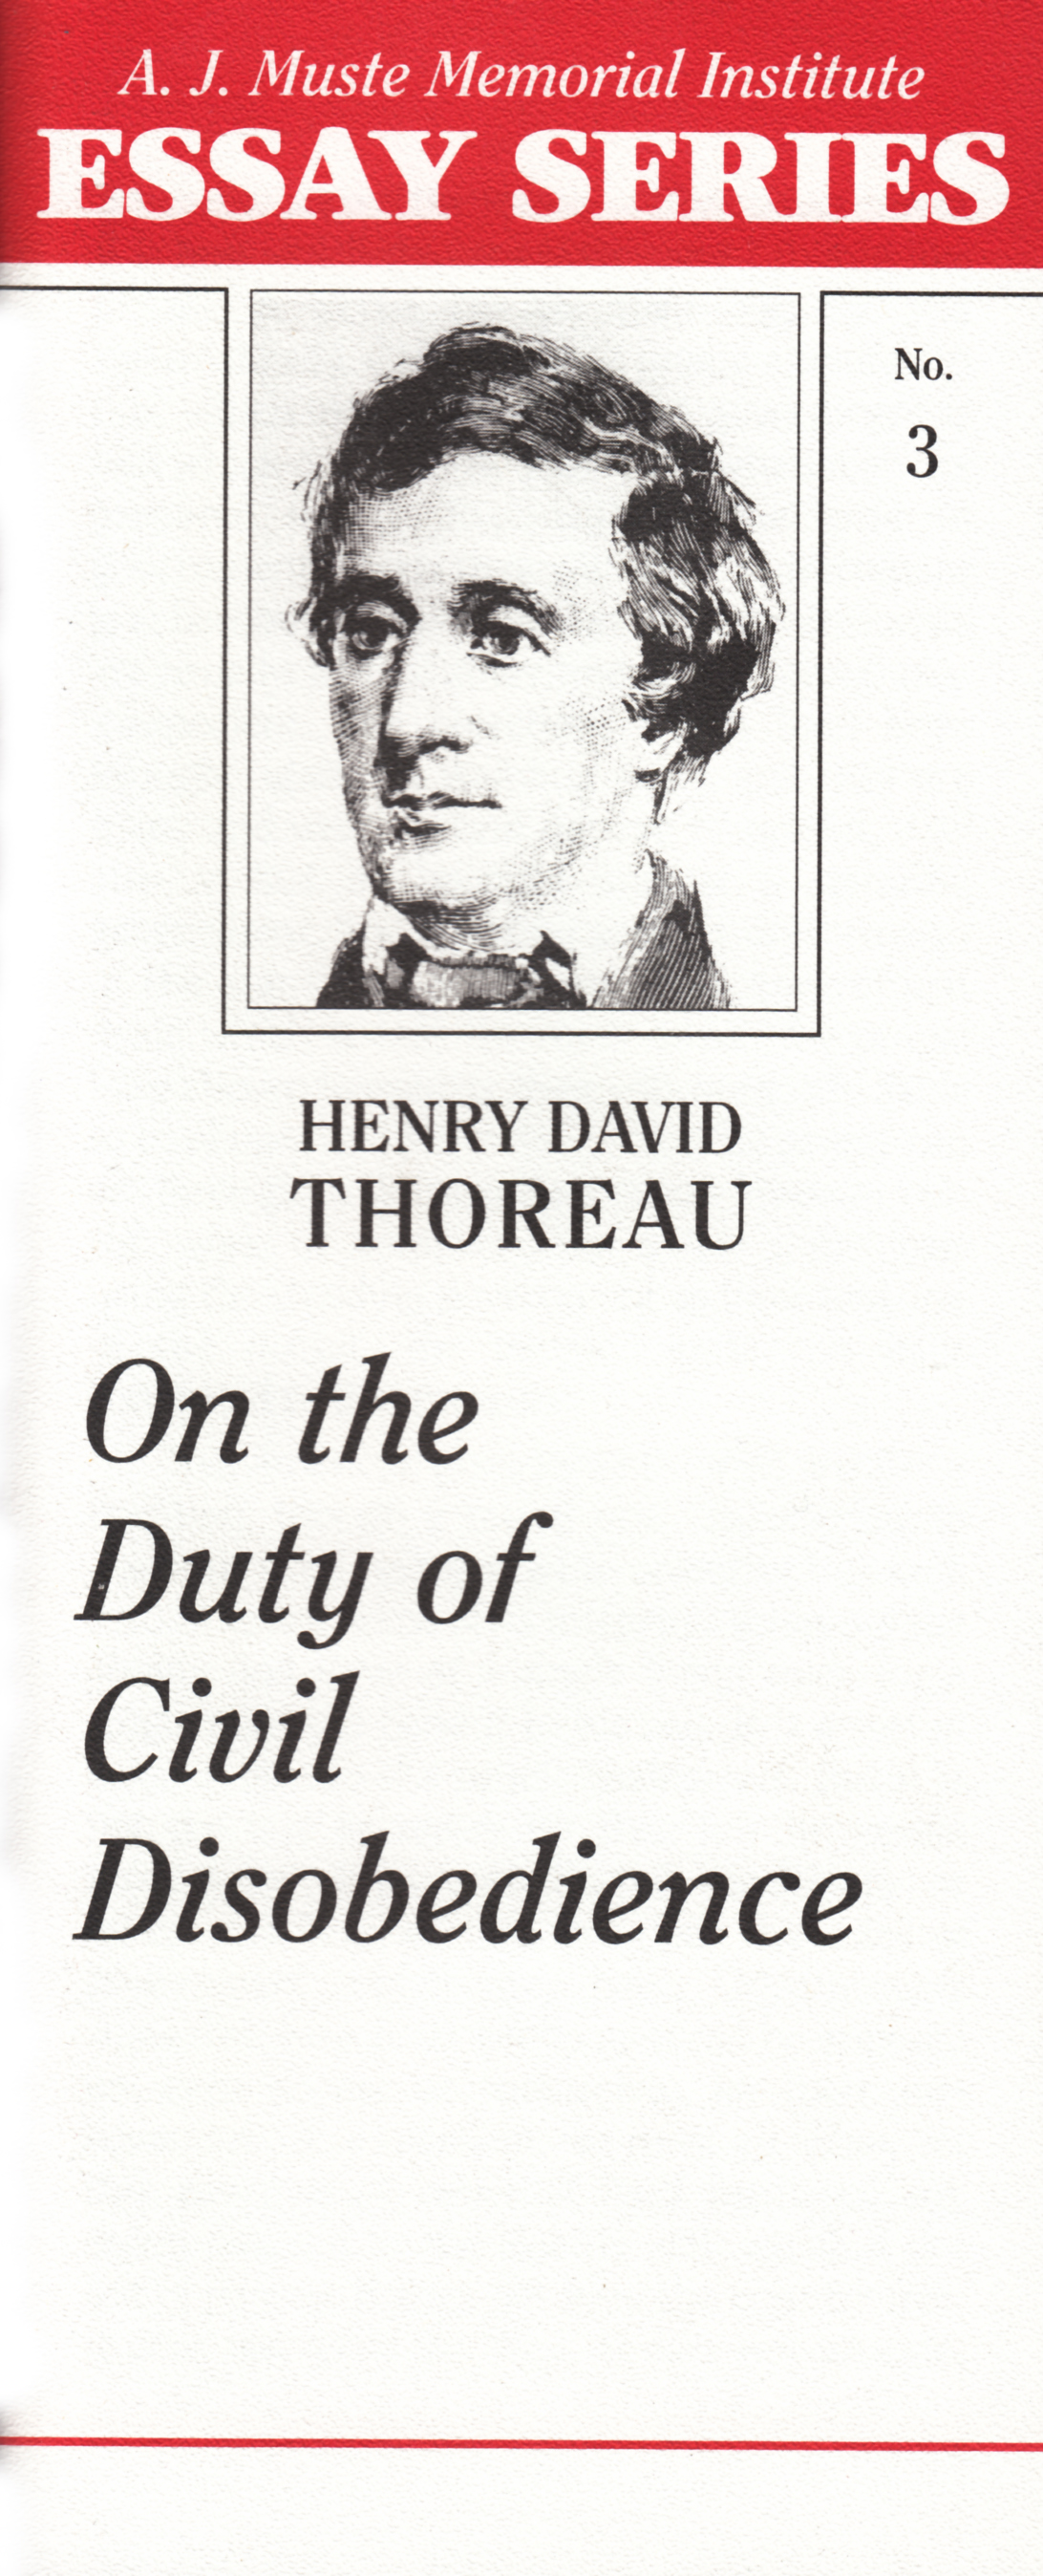 A Summary and Analysis of Henry David Thoreau's 'Civil Disobedience' - Penlighten